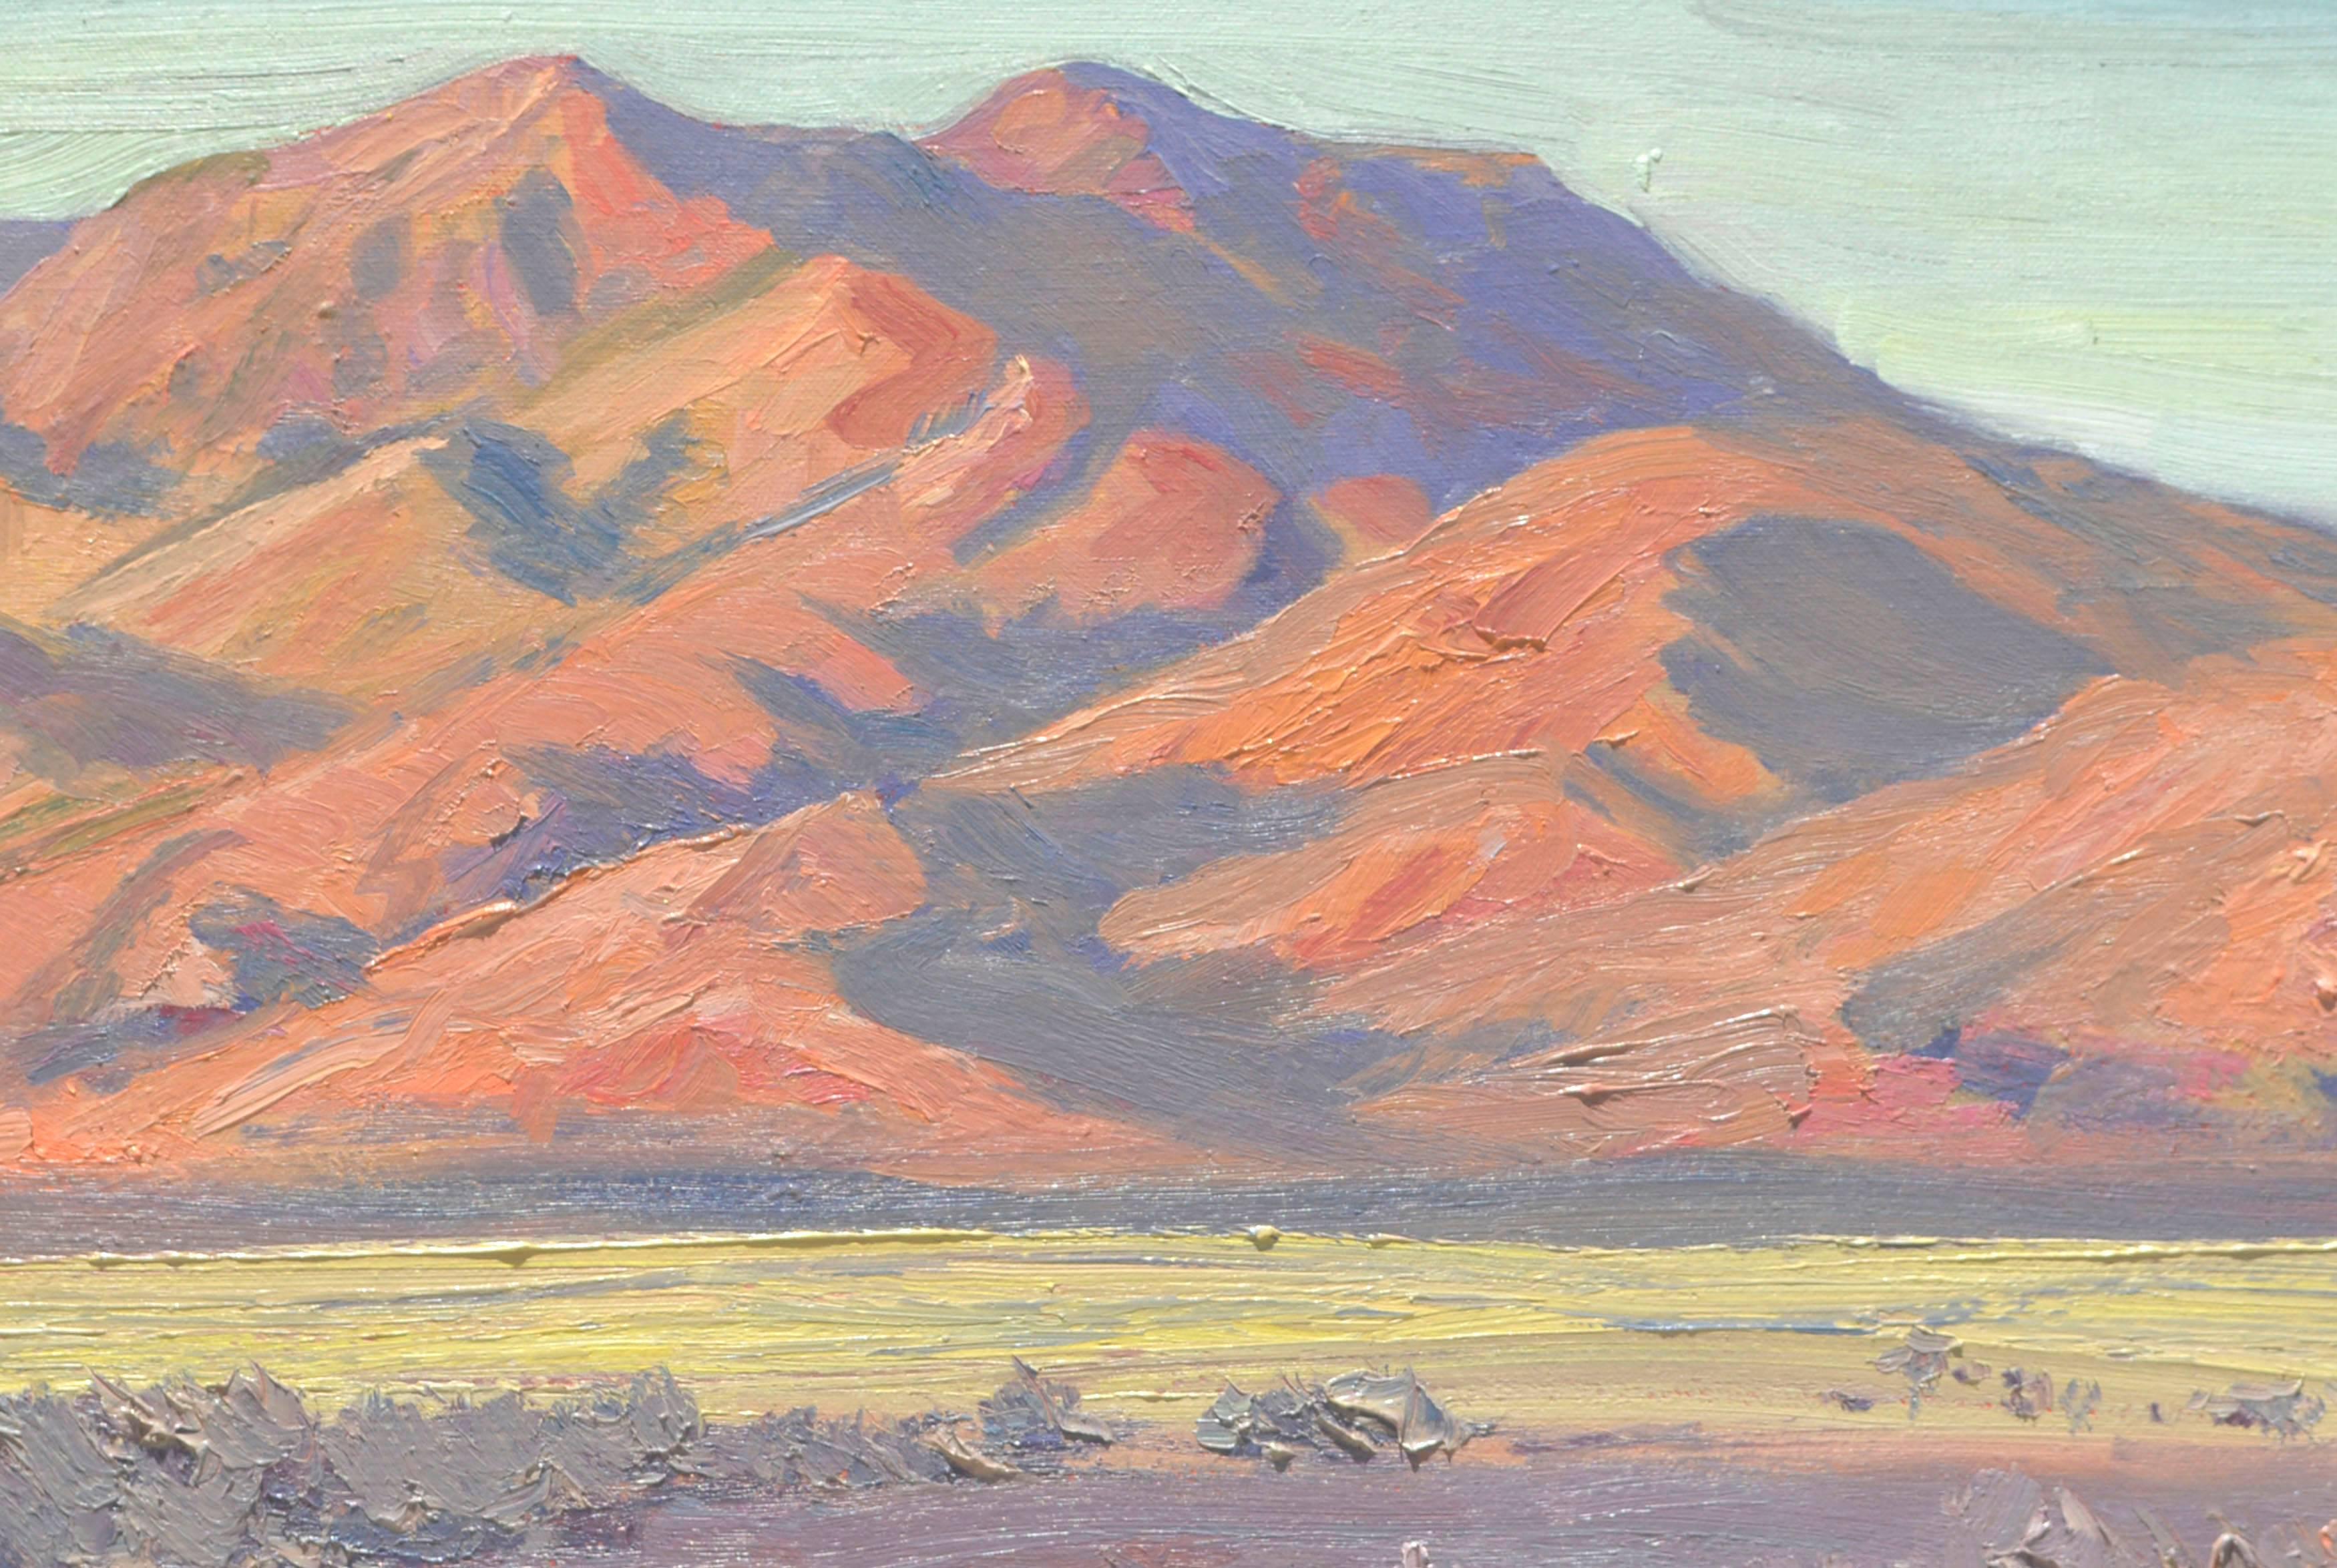 Desert Foothills Landscape - Painting by Mike Wright